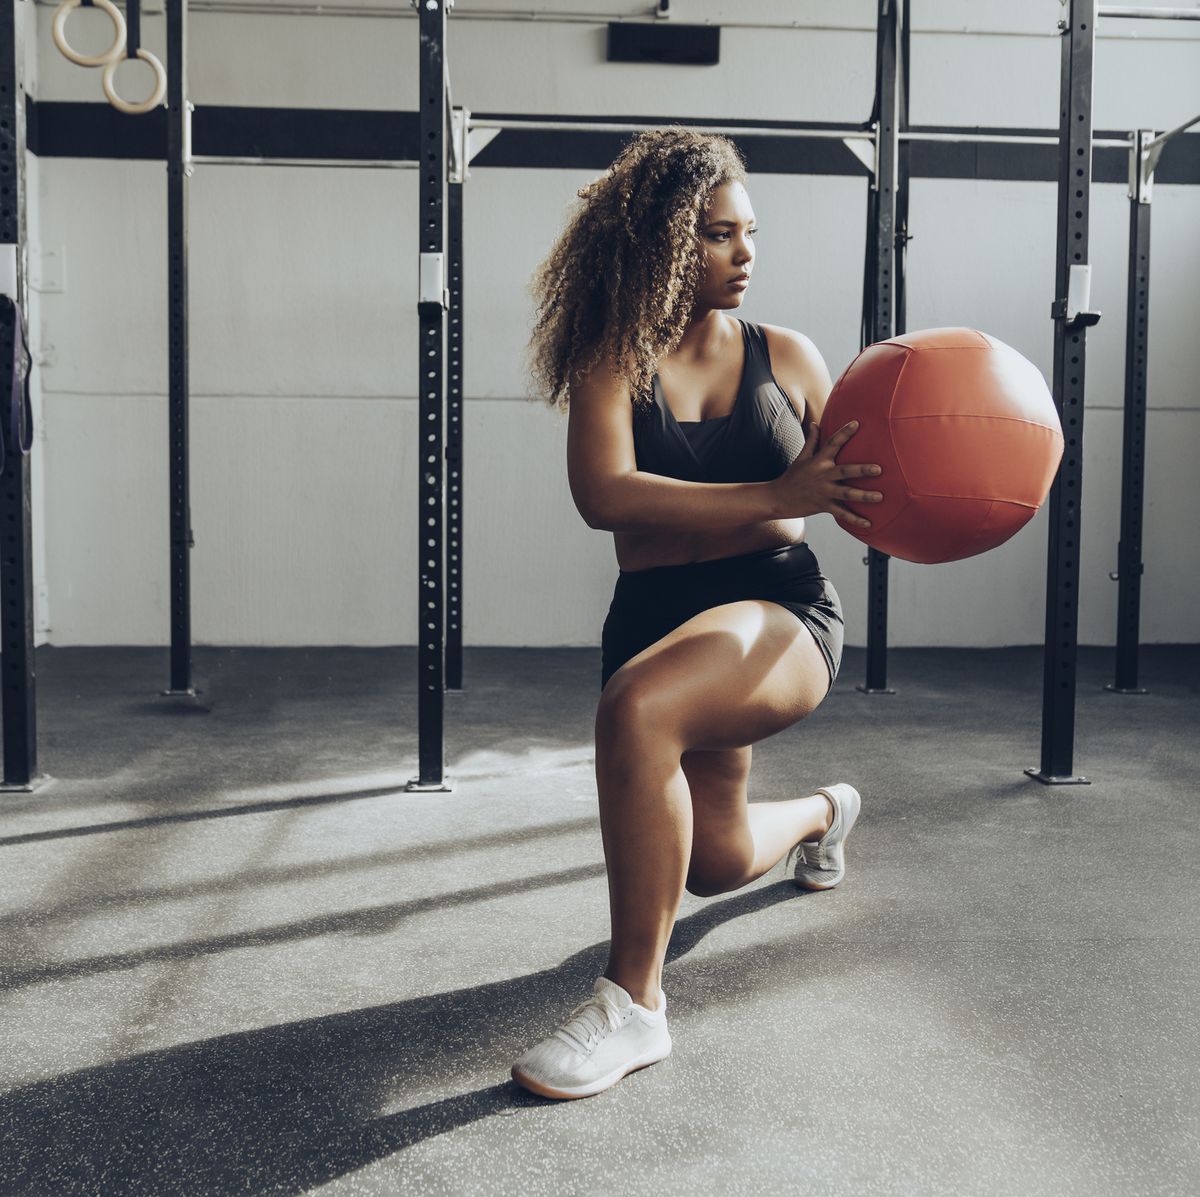 20 Minute Full Body Complexes and Sets Workout